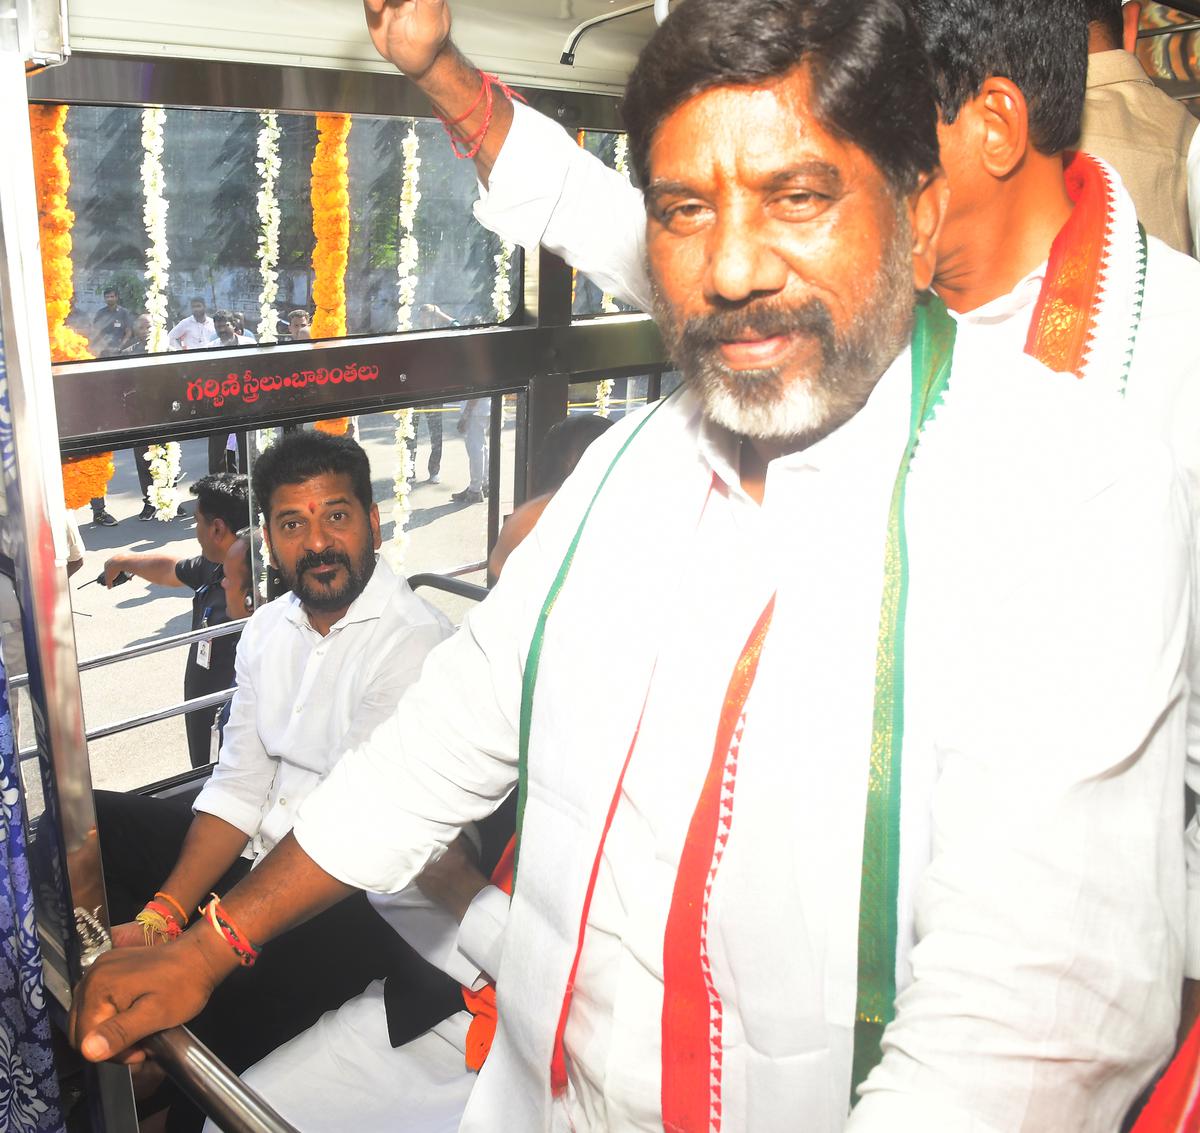 Telangana Chief Minister A Revanth Reddy and Deputy Chief Minister Mallu Bhatti Vikramarka taking a ride in the bus he flagged off after launching Mahalakshmi Scheme in Hyderabad on Saturday.